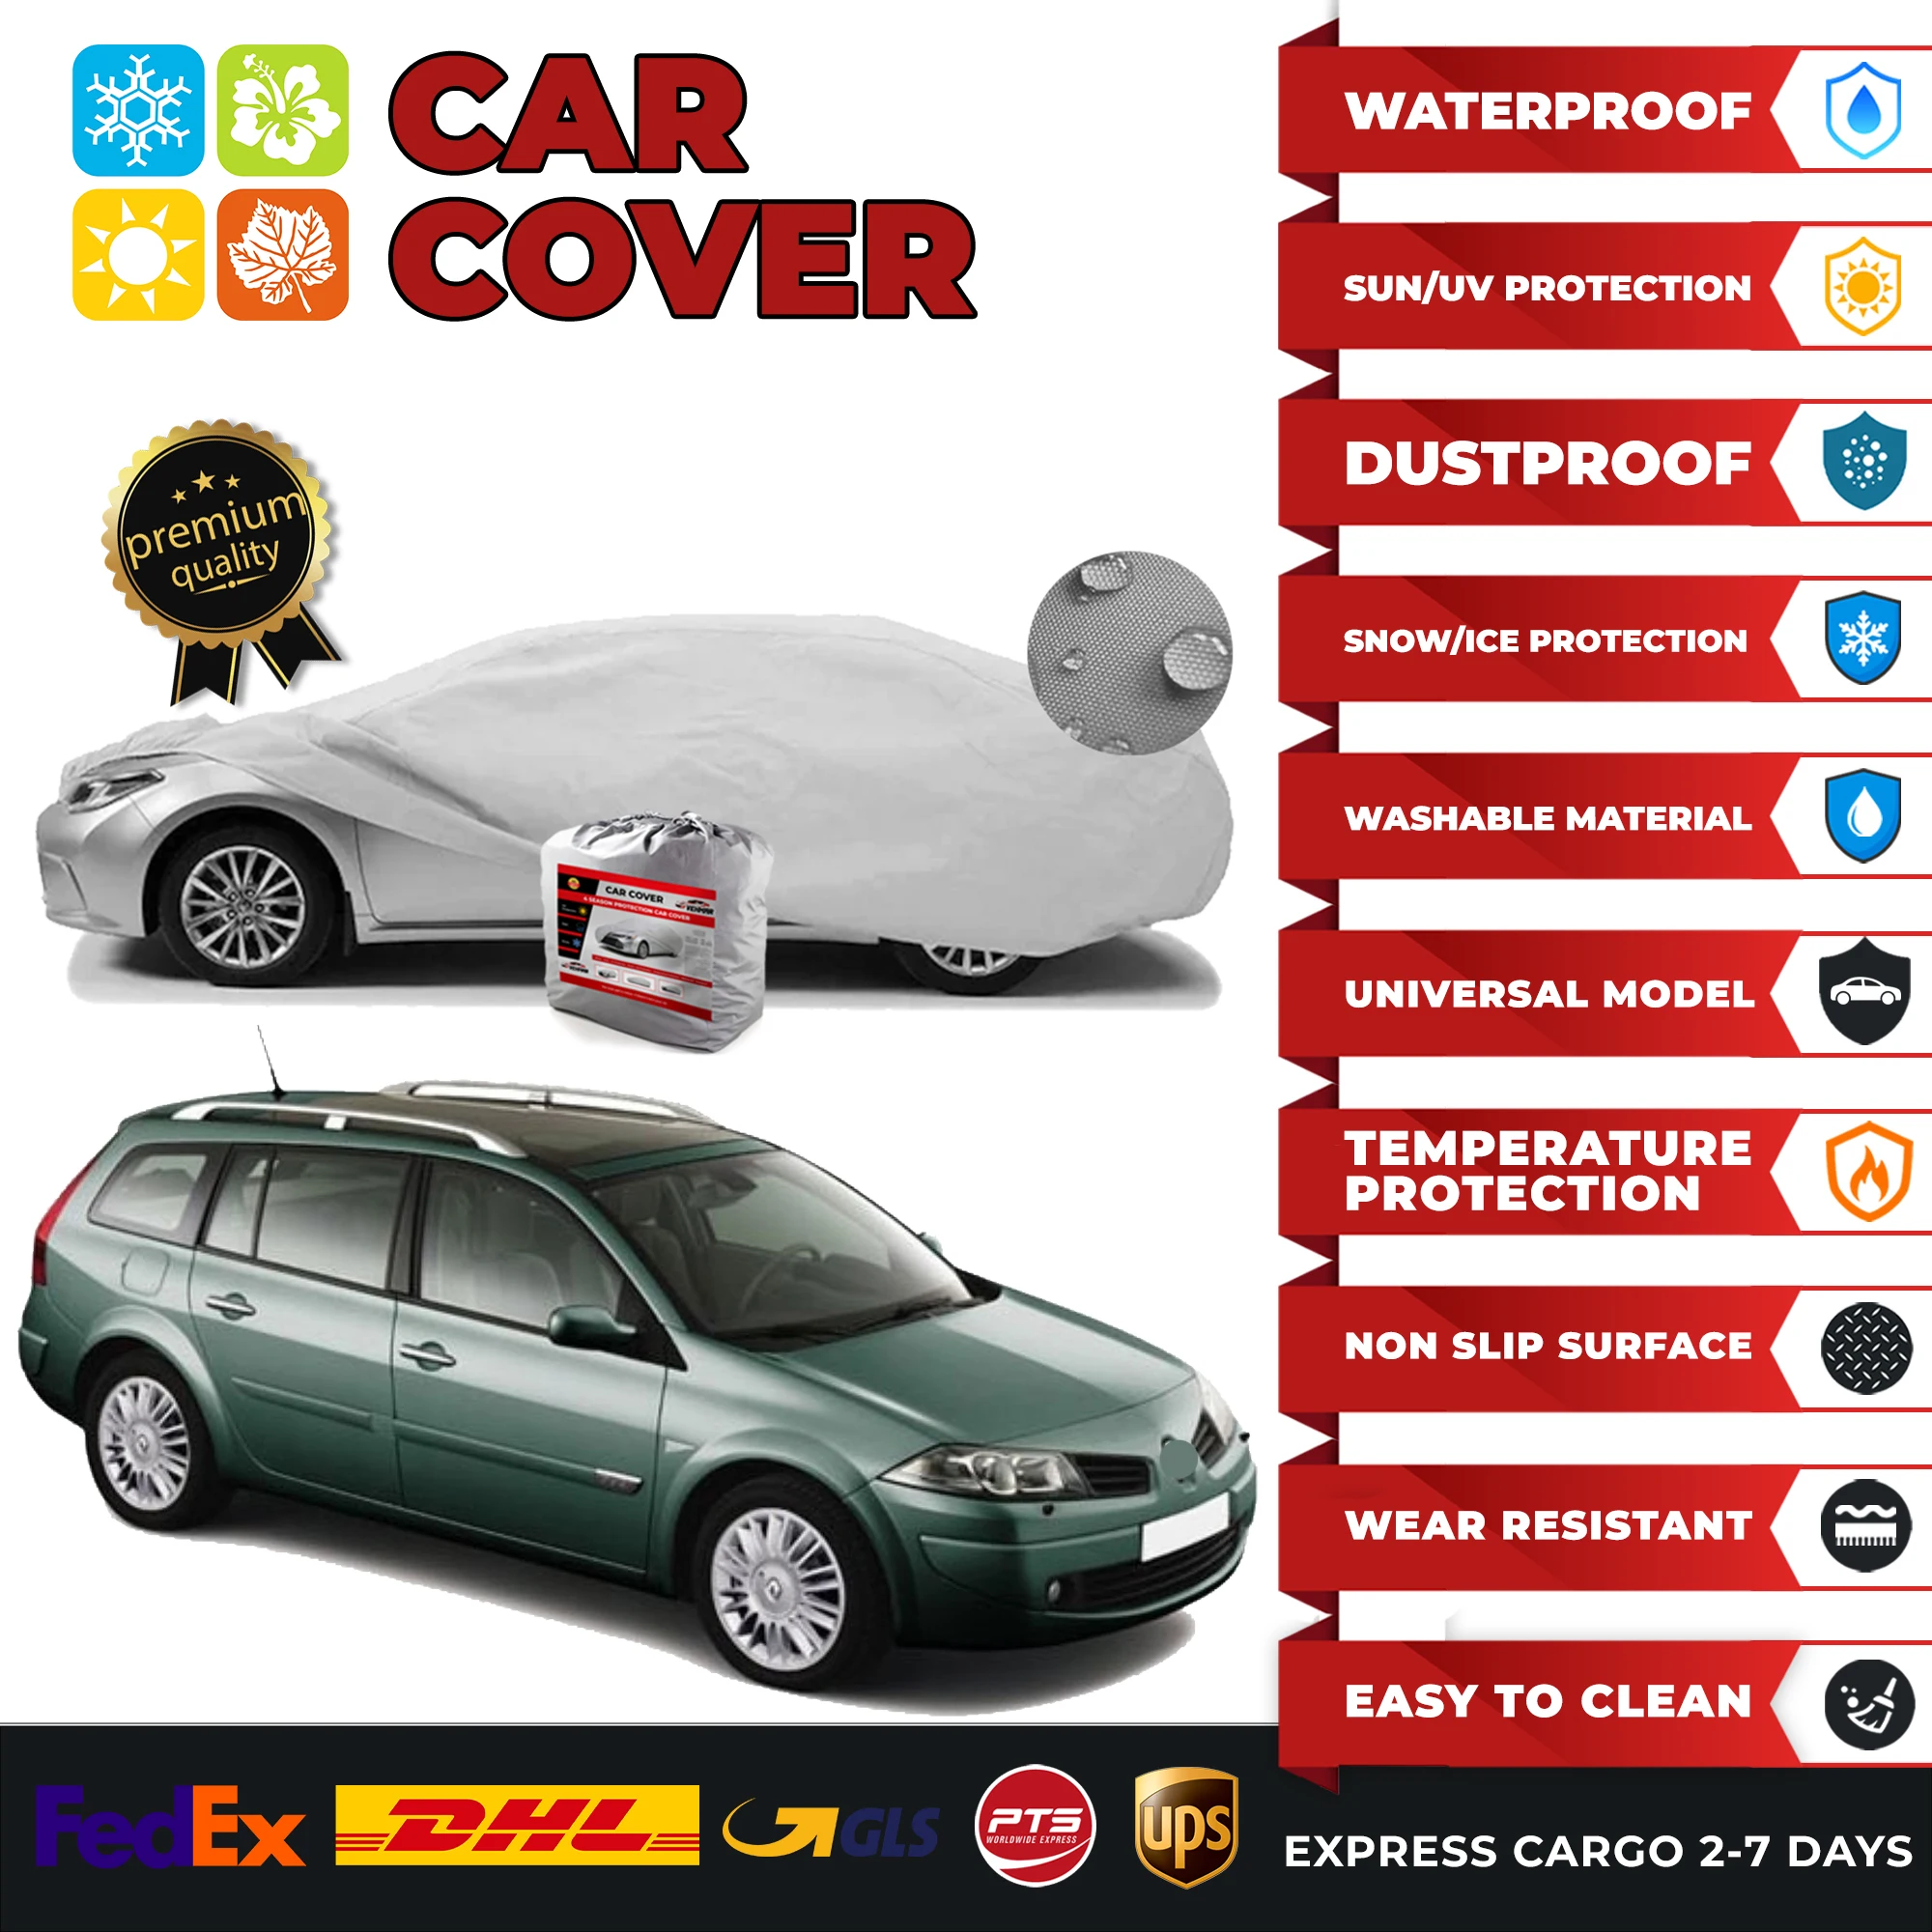 

Car Cover for Renault Megane 2 SW 2002-2008 Universal Car Covers Indoor Outdoor Full Auto Cover Sun UV Dust Resistant Protection